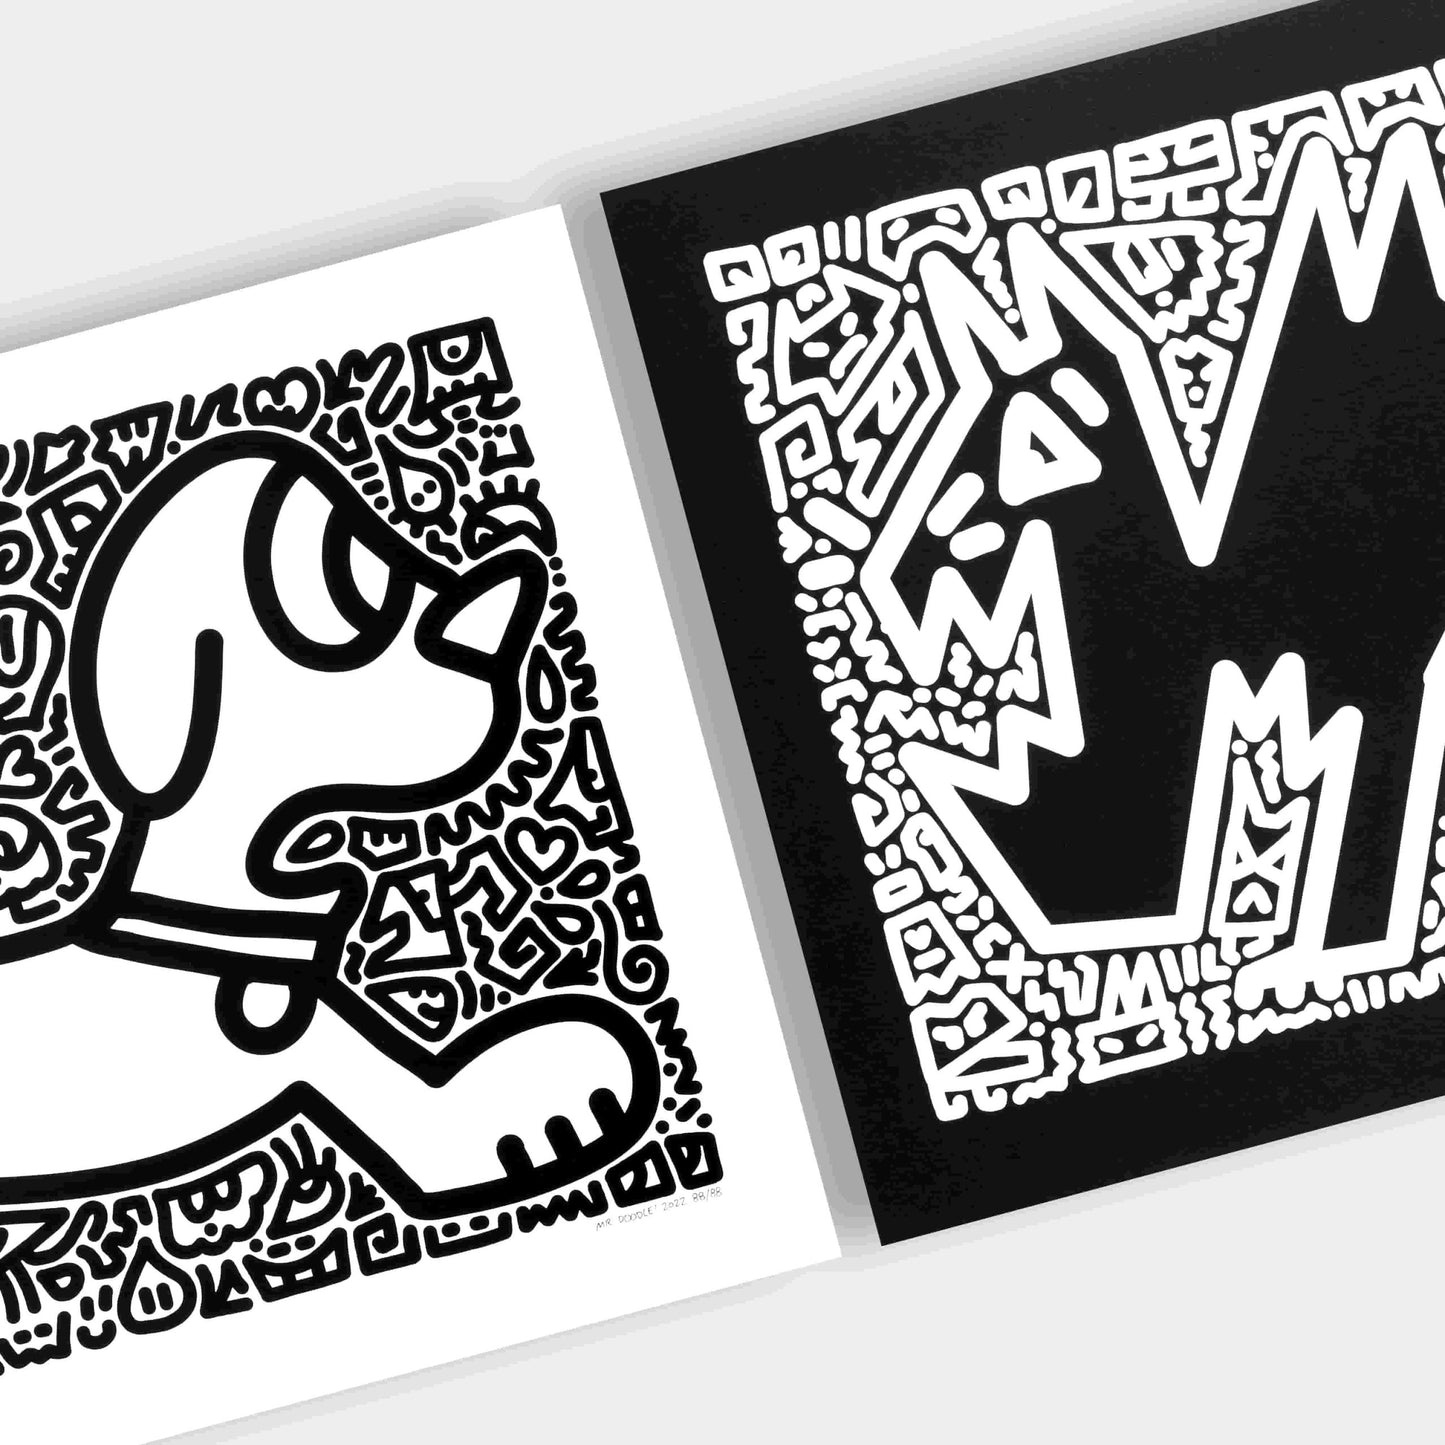 Woof and Meow! - Mr Doodle Lithographie Diptyque